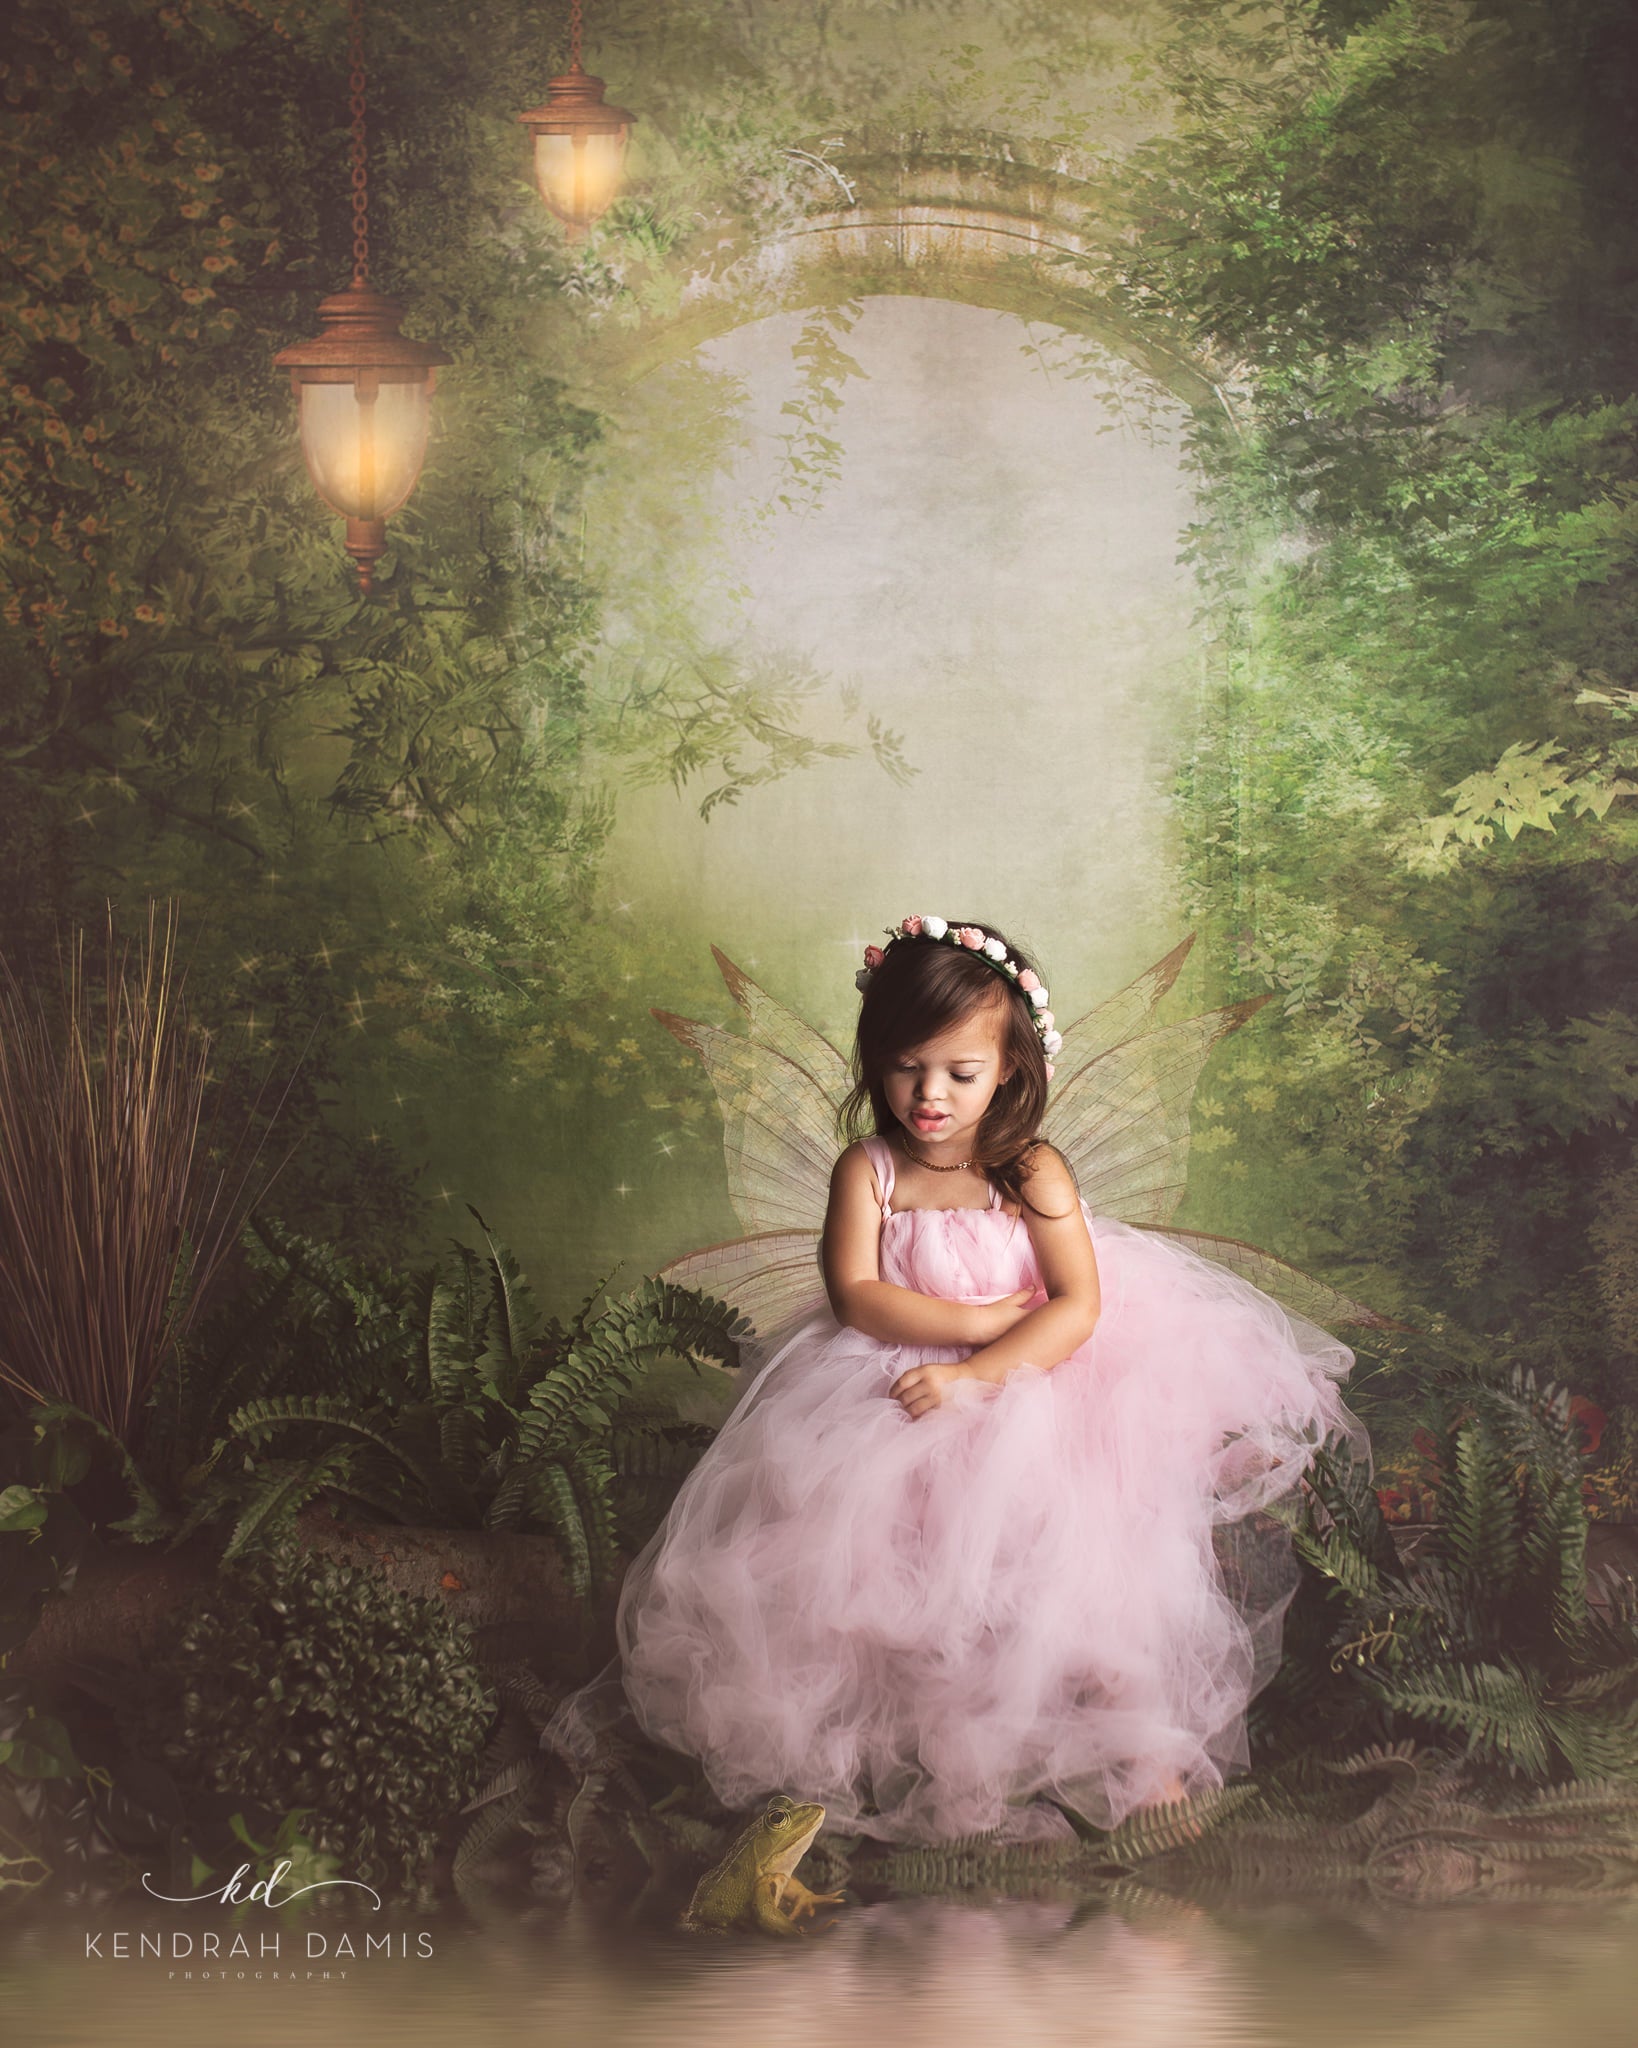 Kate Spring Green Dreamlike Fairytale Forest Backdrop for Photoshoot